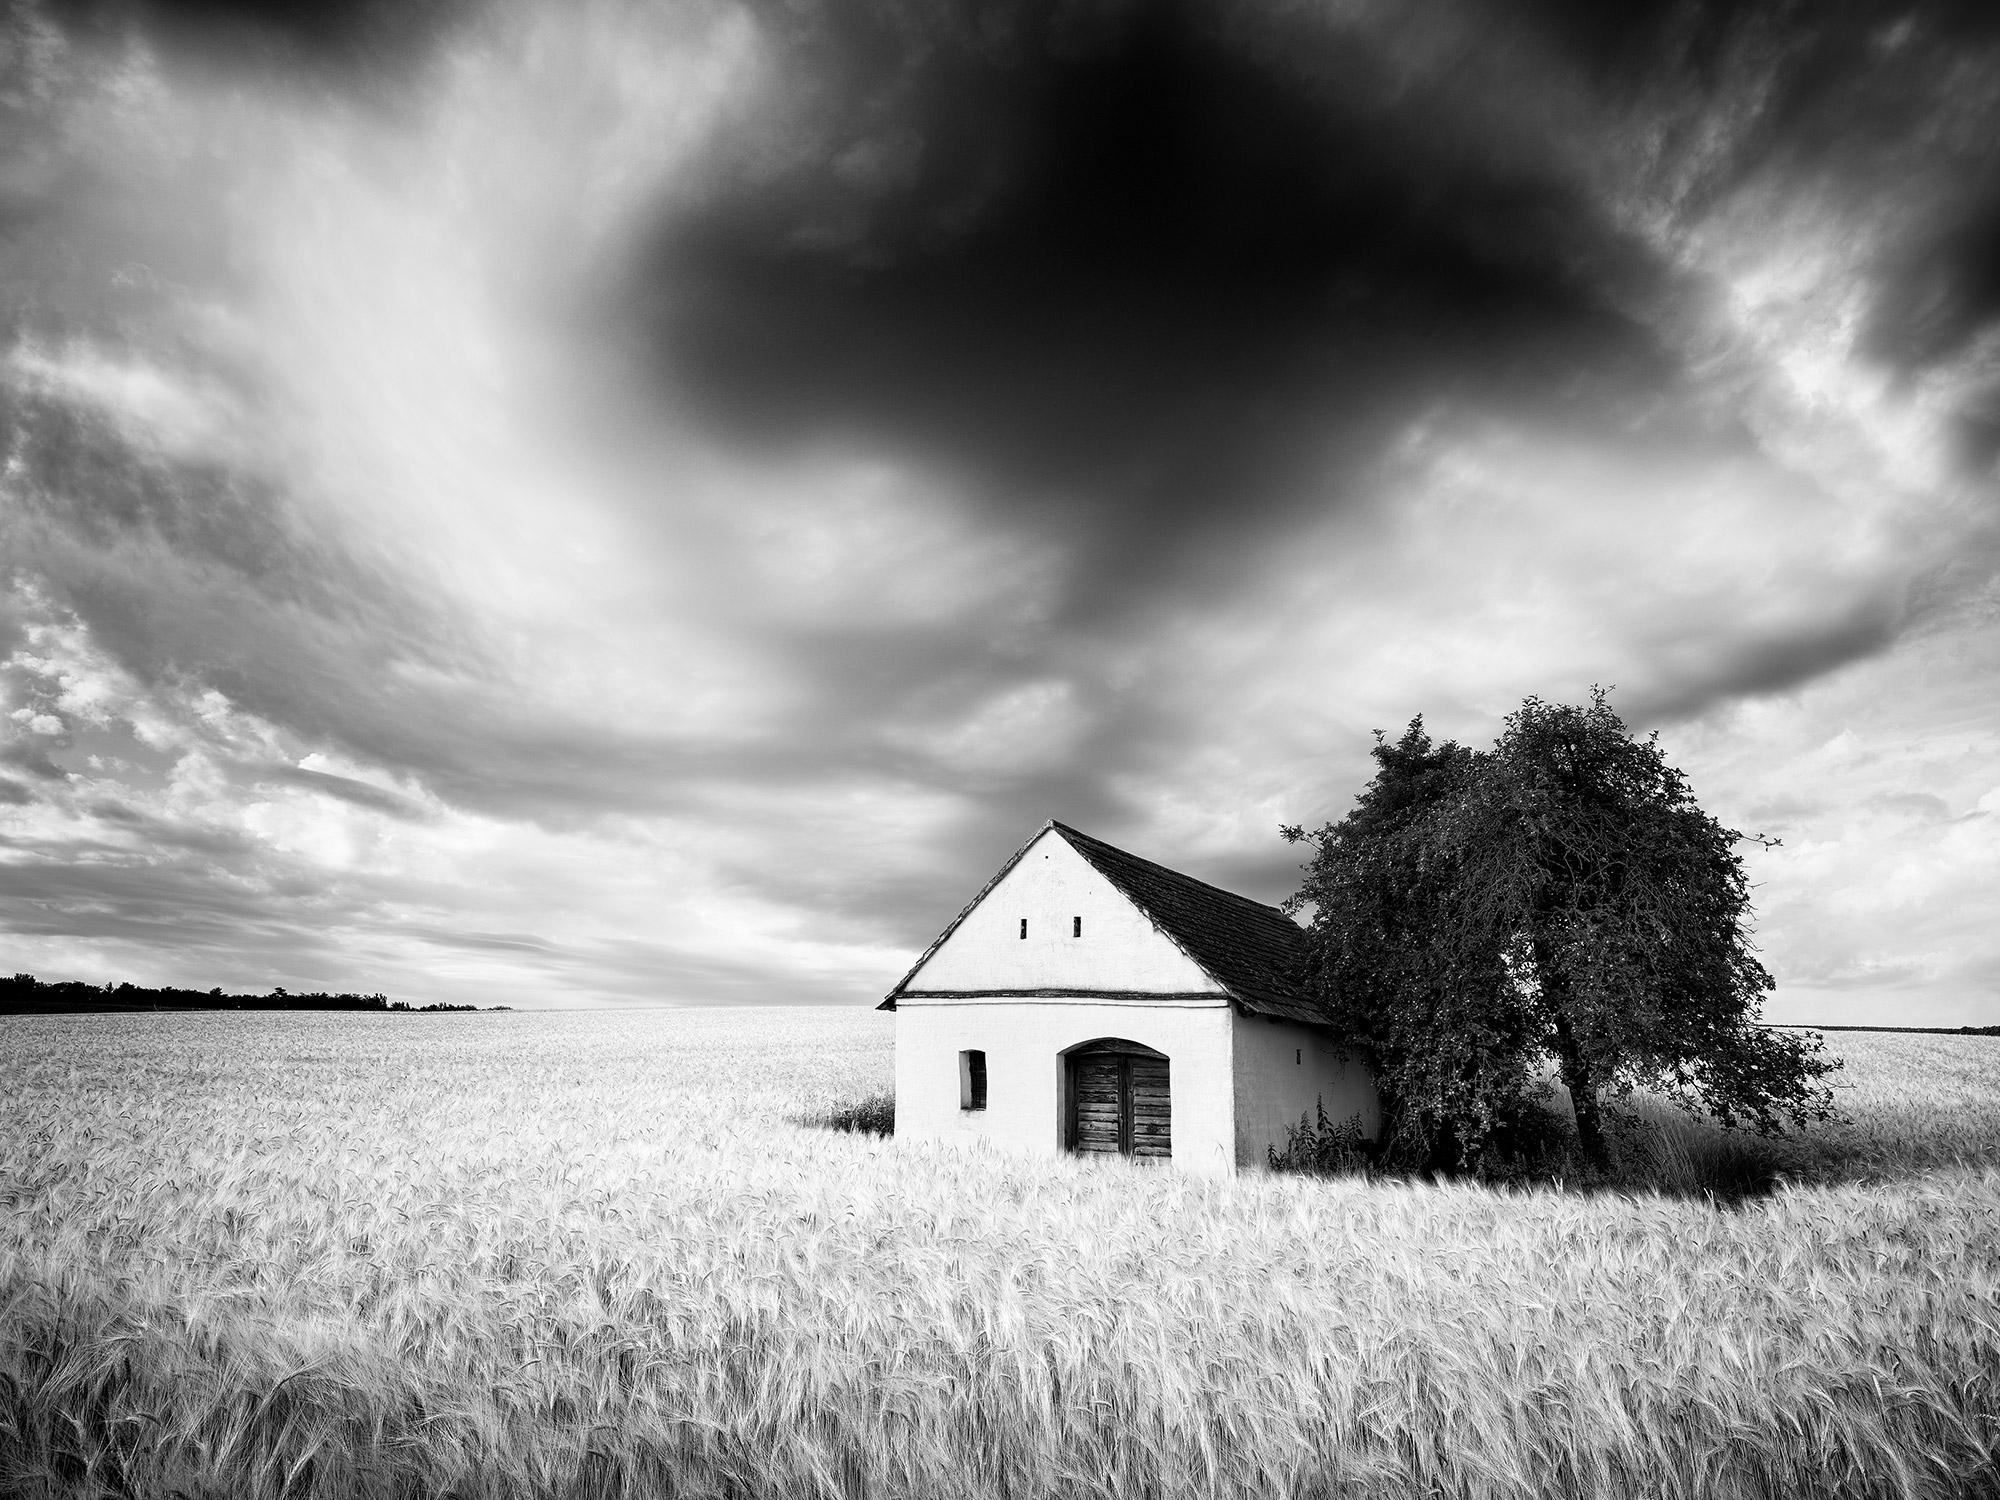 Wine Press House, cornfield, Giant Cloud, black and white photography, landscape